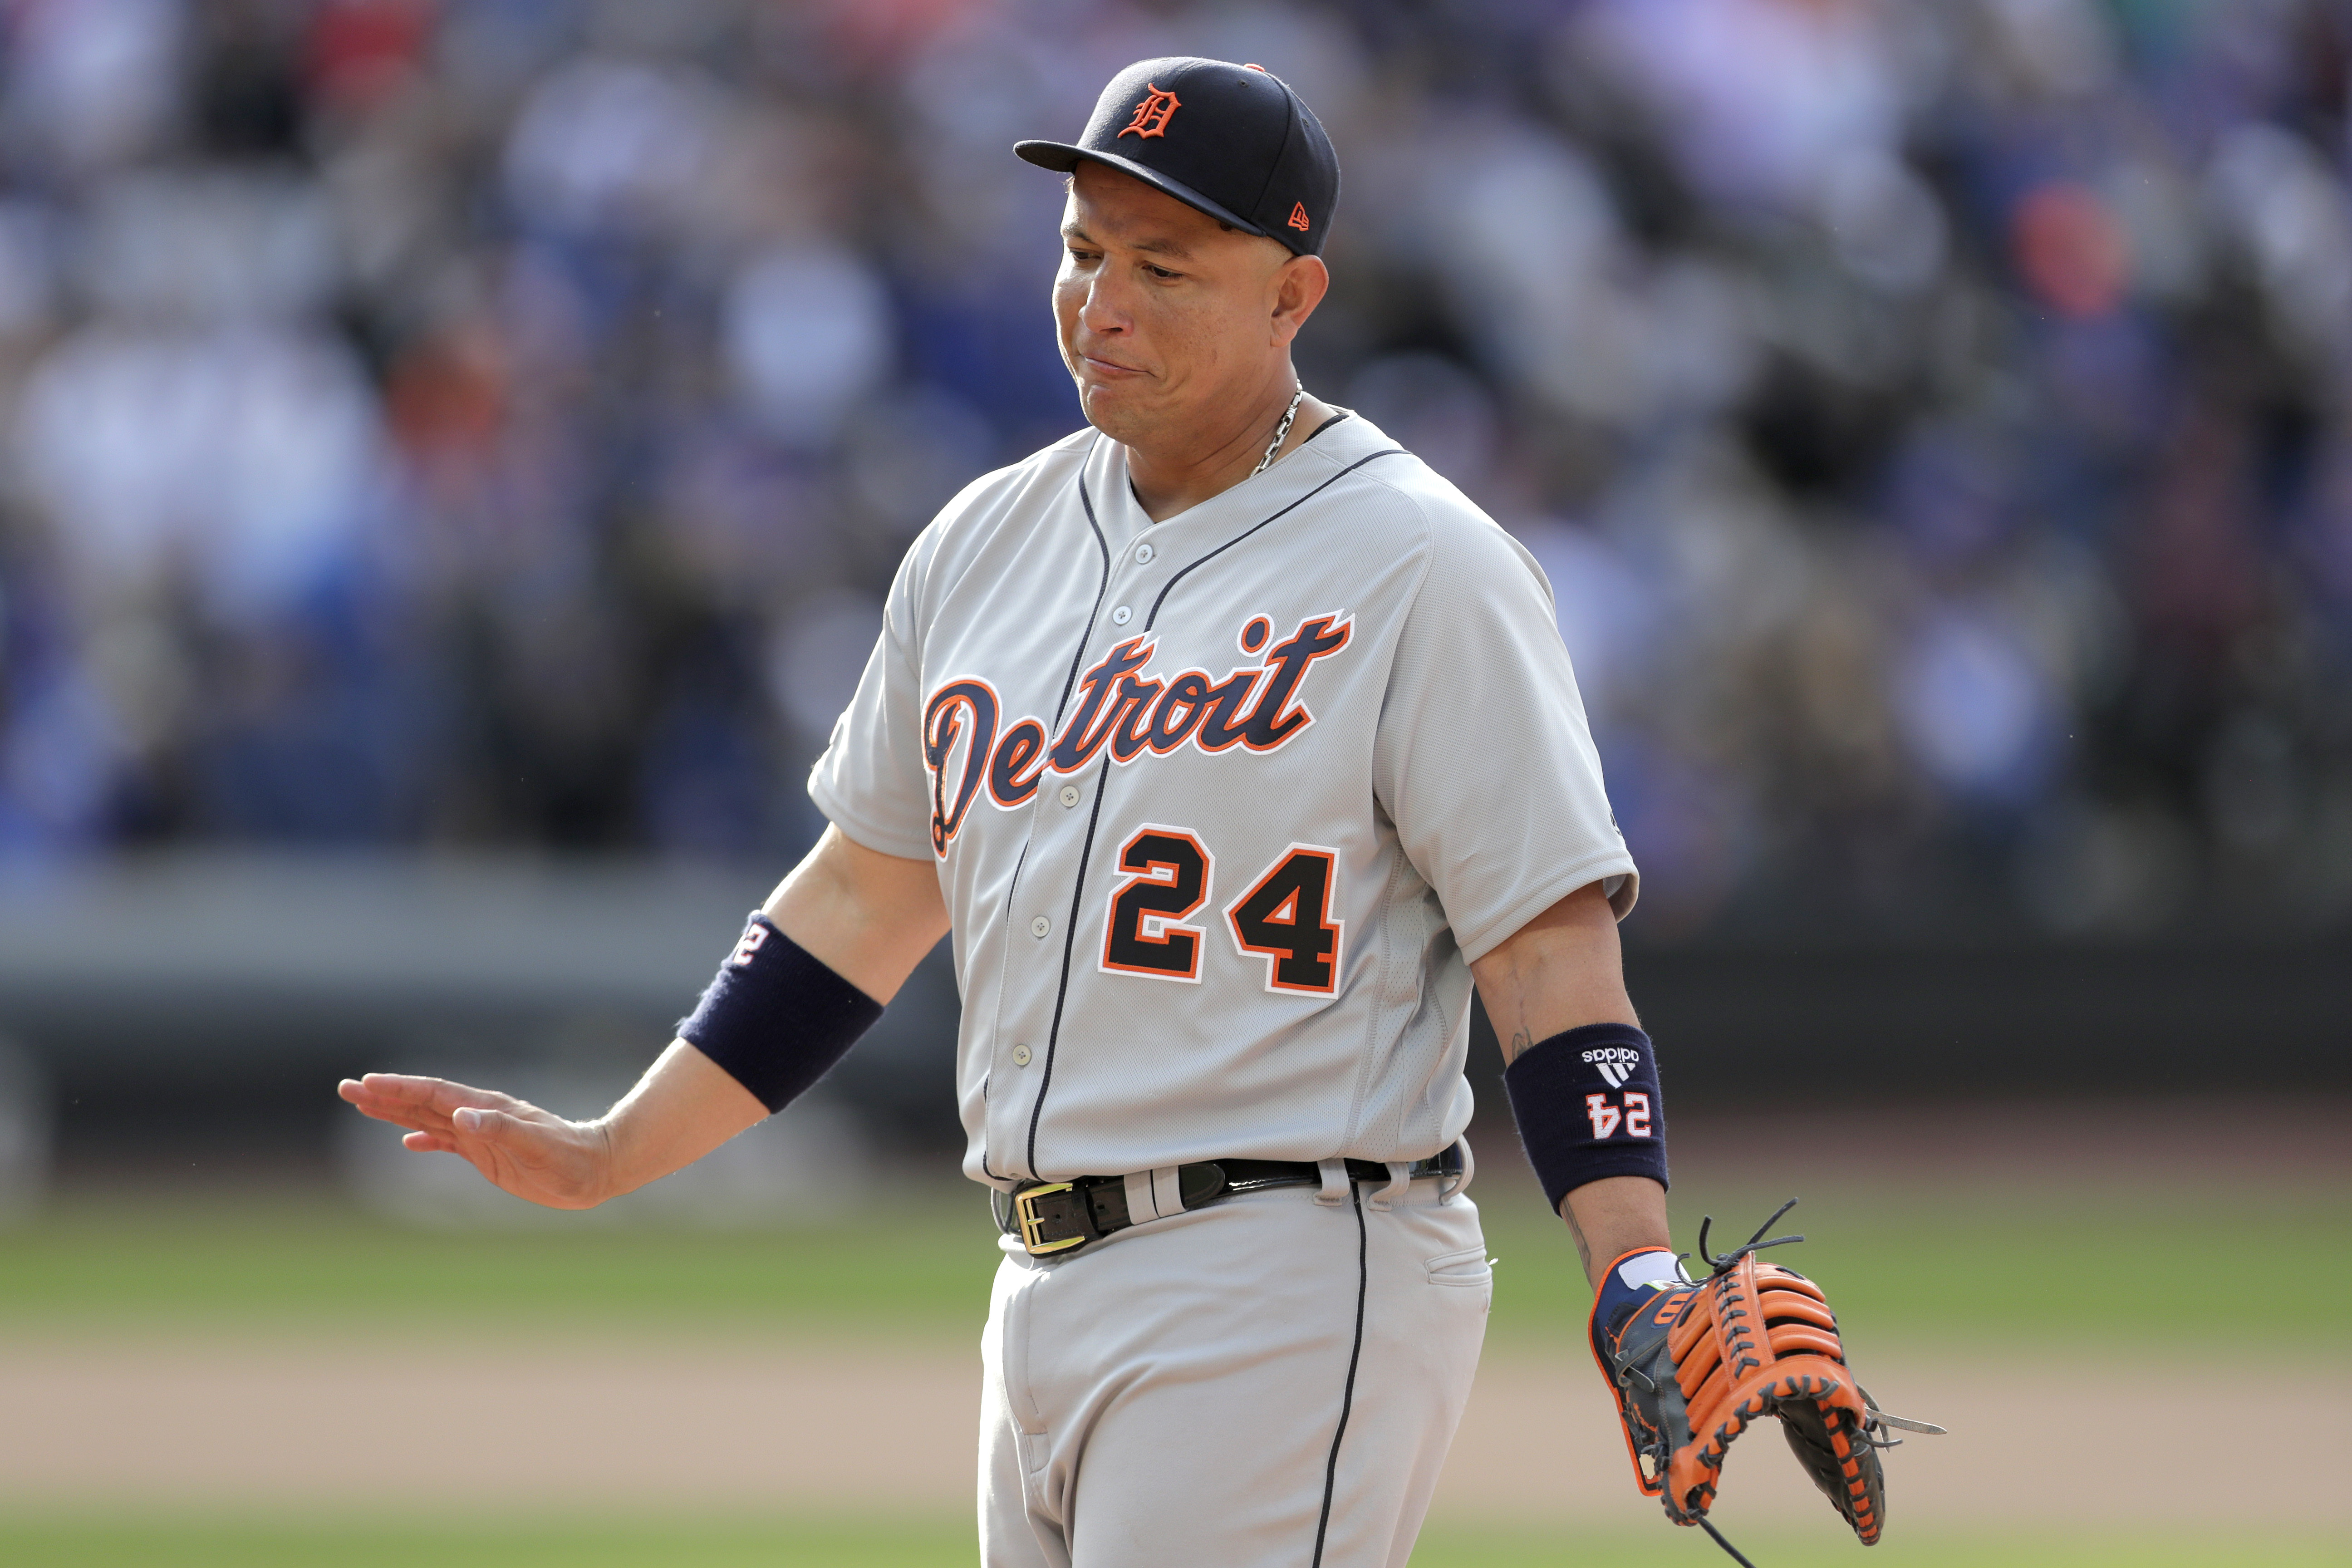 Cabrera out of Tigers' lineup, waits for MRI results on knee